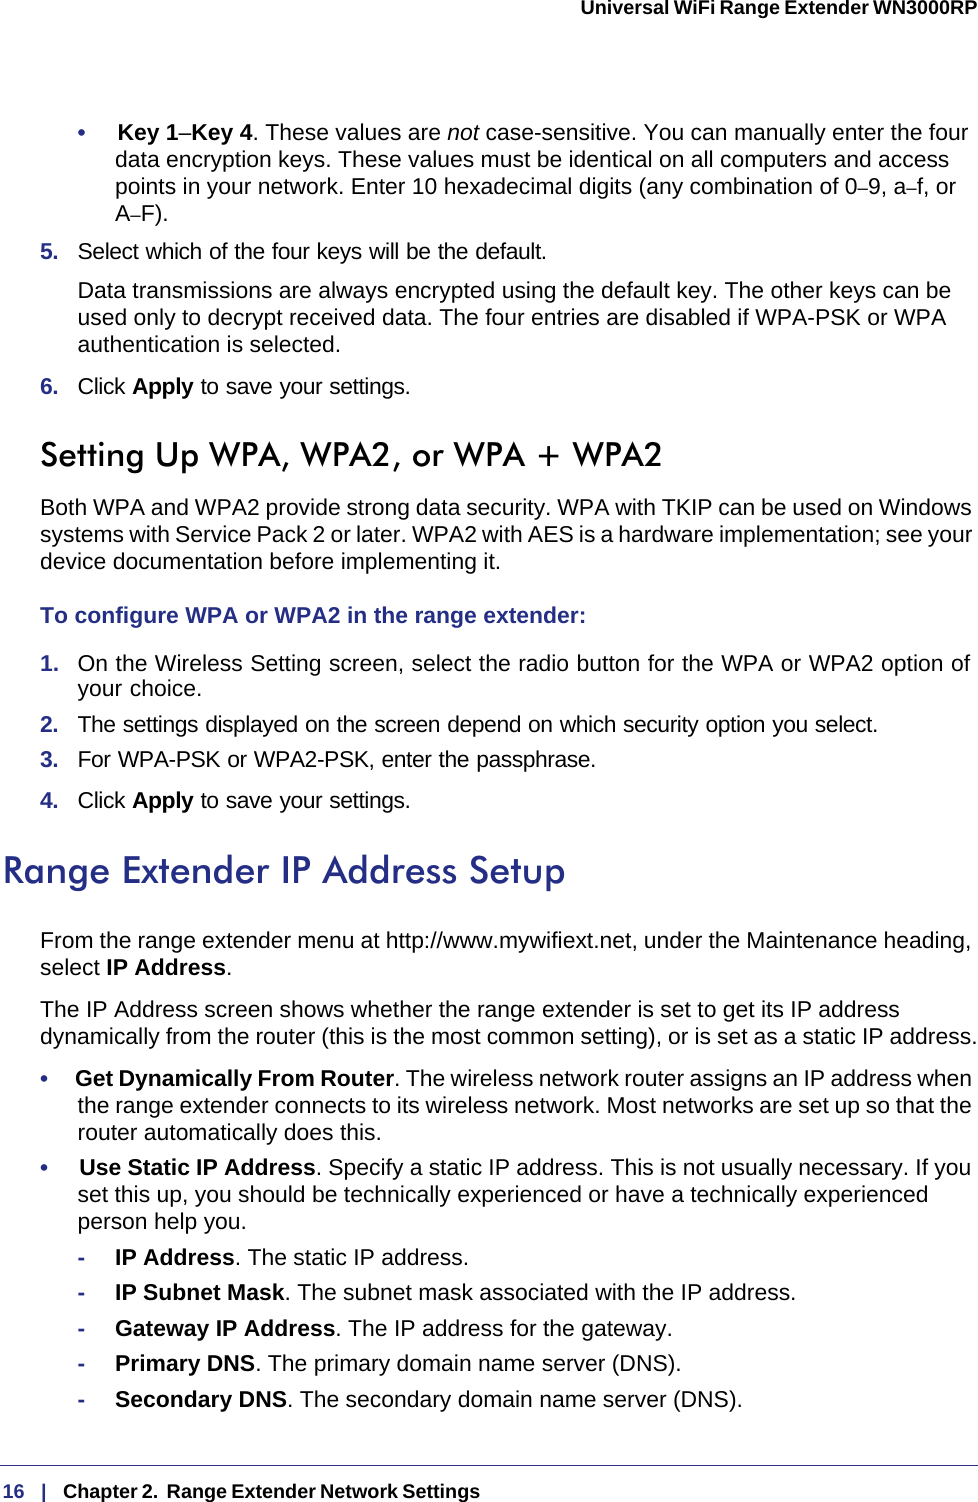 16   |   Chapter 2.  Range Extender Network Settings  Universal WiFi Range Extender WN3000RP •     Key 1–Key 4. These values are not case-sensitive. You can manually enter the four data encryption keys. These values must be identical on all computers and access points in your network. Enter 10 hexadecimal digits (any combination of 0–9, a–f, or A–F).5.  Select which of the four keys will be the default. Data transmissions are always encrypted using the default key. The other keys can be used only to decrypt received data. The four entries are disabled if WPA-PSK or WPA authentication is selected. 6.  Click Apply to save your settings.Setting Up WPA, WPA2, or WPA + WPA2Both WPA and WPA2 provide strong data security. WPA with TKIP can be used on Windows systems with Service Pack 2 or later. WPA2 with AES is a hardware implementation; see your device documentation before implementing it. To configure WPA or WPA2 in the range extender:1.  On the Wireless Setting screen, select the radio button for the WPA or WPA2 option of your choice.2.  The settings displayed on the screen depend on which security option you select.3.  For WPA-PSK or WPA2-PSK, enter the passphrase. 4.  Click Apply to save your settings.Range Extender IP Address SetupFrom the range extender menu at http://www.mywifiext.net, under the Maintenance heading, select IP Address. The IP Address screen shows whether the range extender is set to get its IP address dynamically from the router (this is the most common setting), or is set as a static IP address.•     Get Dynamically From Router. The wireless network router assigns an IP address when the range extender connects to its wireless network. Most networks are set up so that the router automatically does this.•     Use Static IP Address. Specify a static IP address. This is not usually necessary. If you set this up, you should be technically experienced or have a technically experienced person help you.-IP Address. The static IP address.-IP Subnet Mask. The subnet mask associated with the IP address.-Gateway IP Address. The IP address for the gateway.-Primary DNS. The primary domain name server (DNS).-Secondary DNS. The secondary domain name server (DNS).